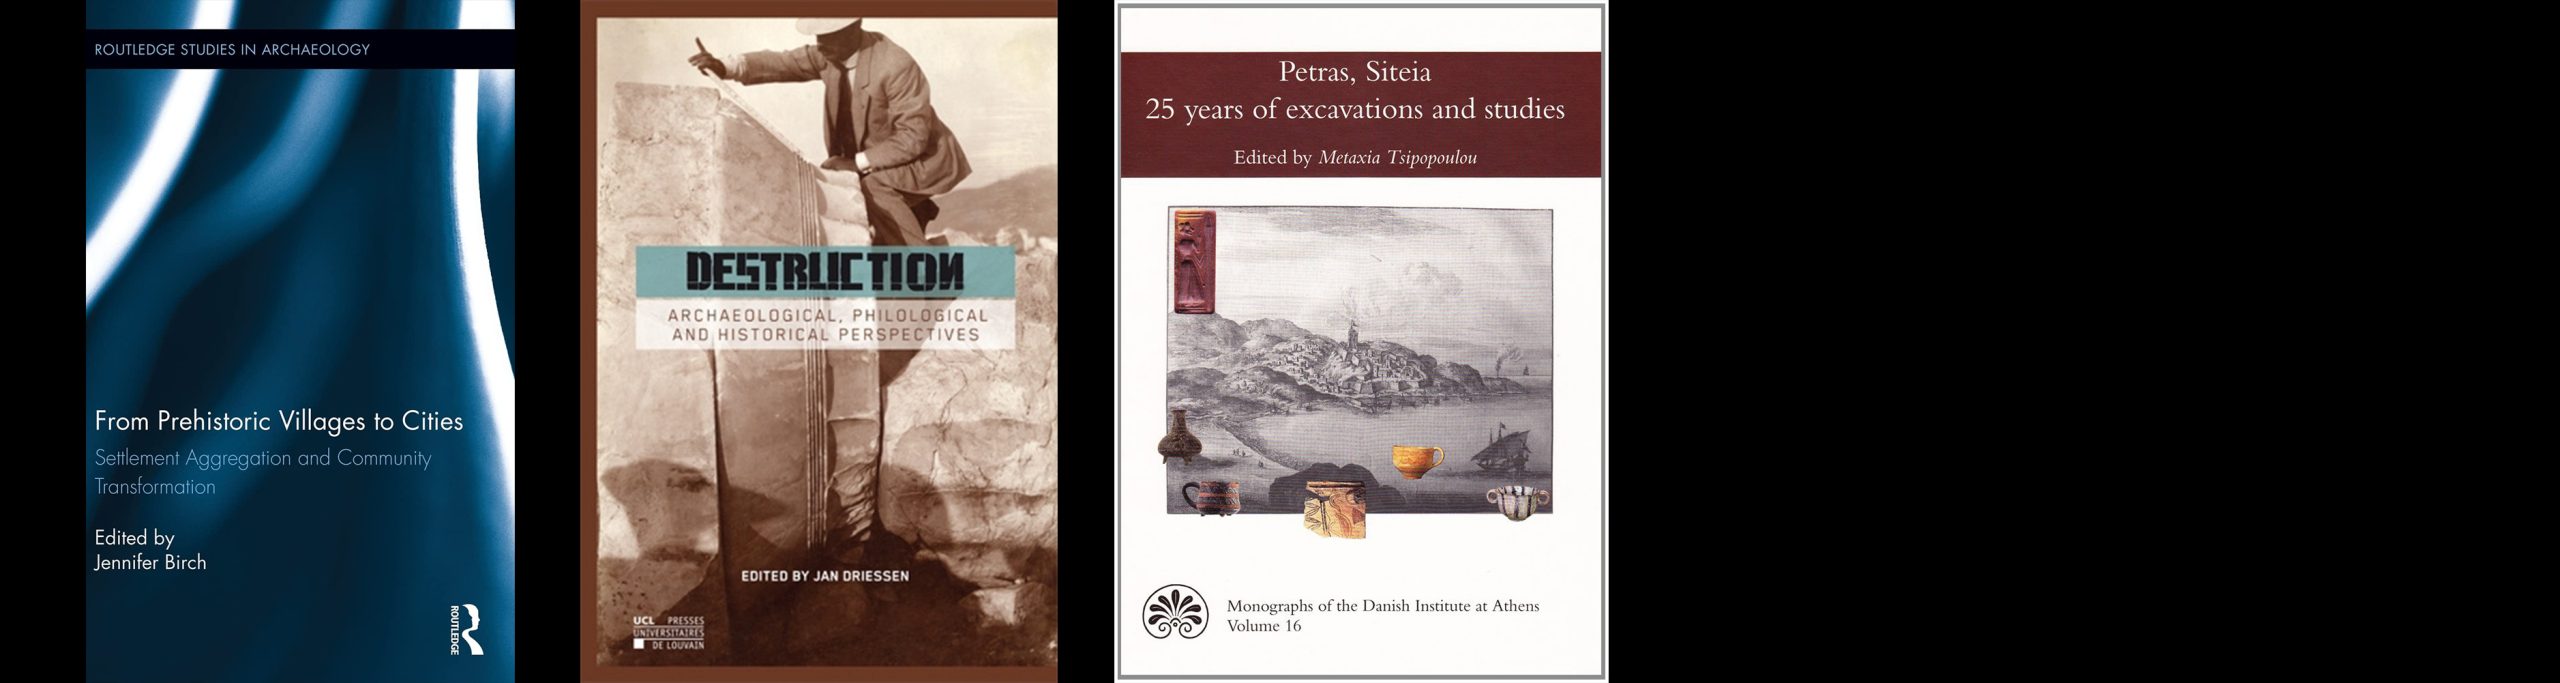 1. from prehistoric villages to cities: settlement aggregation and community transformation. 2. destruction: archaeological, philological and historical perspectives. 3. petra, sitea: 25 years of excavations and studies.